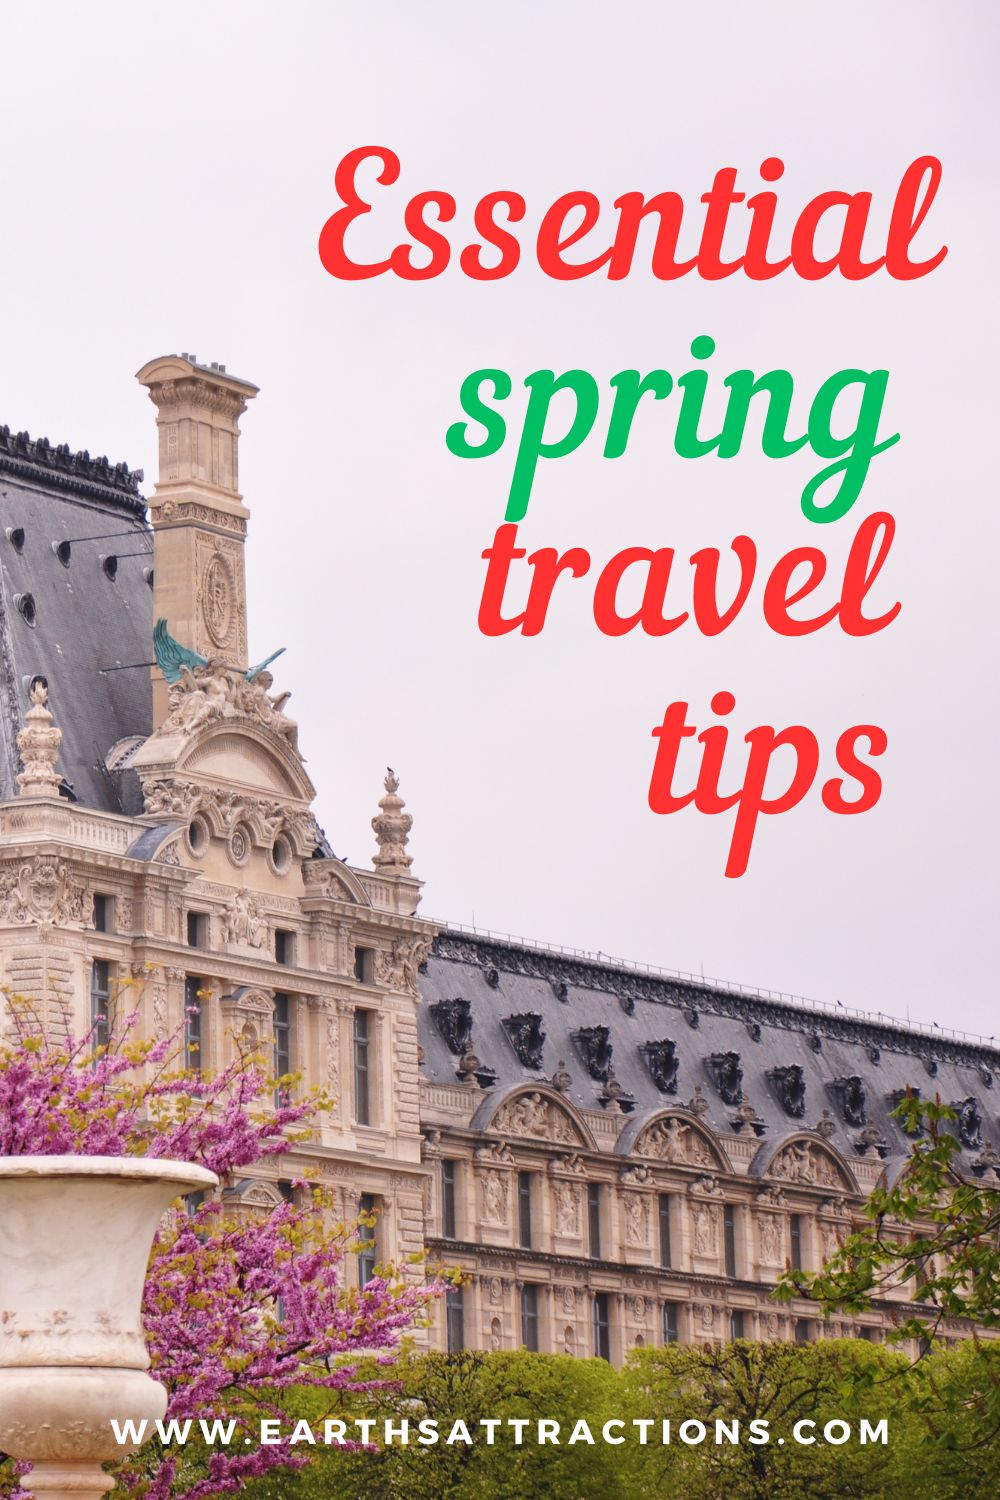 Essential spring travel tips. How to select your spring break destination and more on this list of spring break travel tips #spring #springtravel #springbreaktravel #springtips #springtraveltips